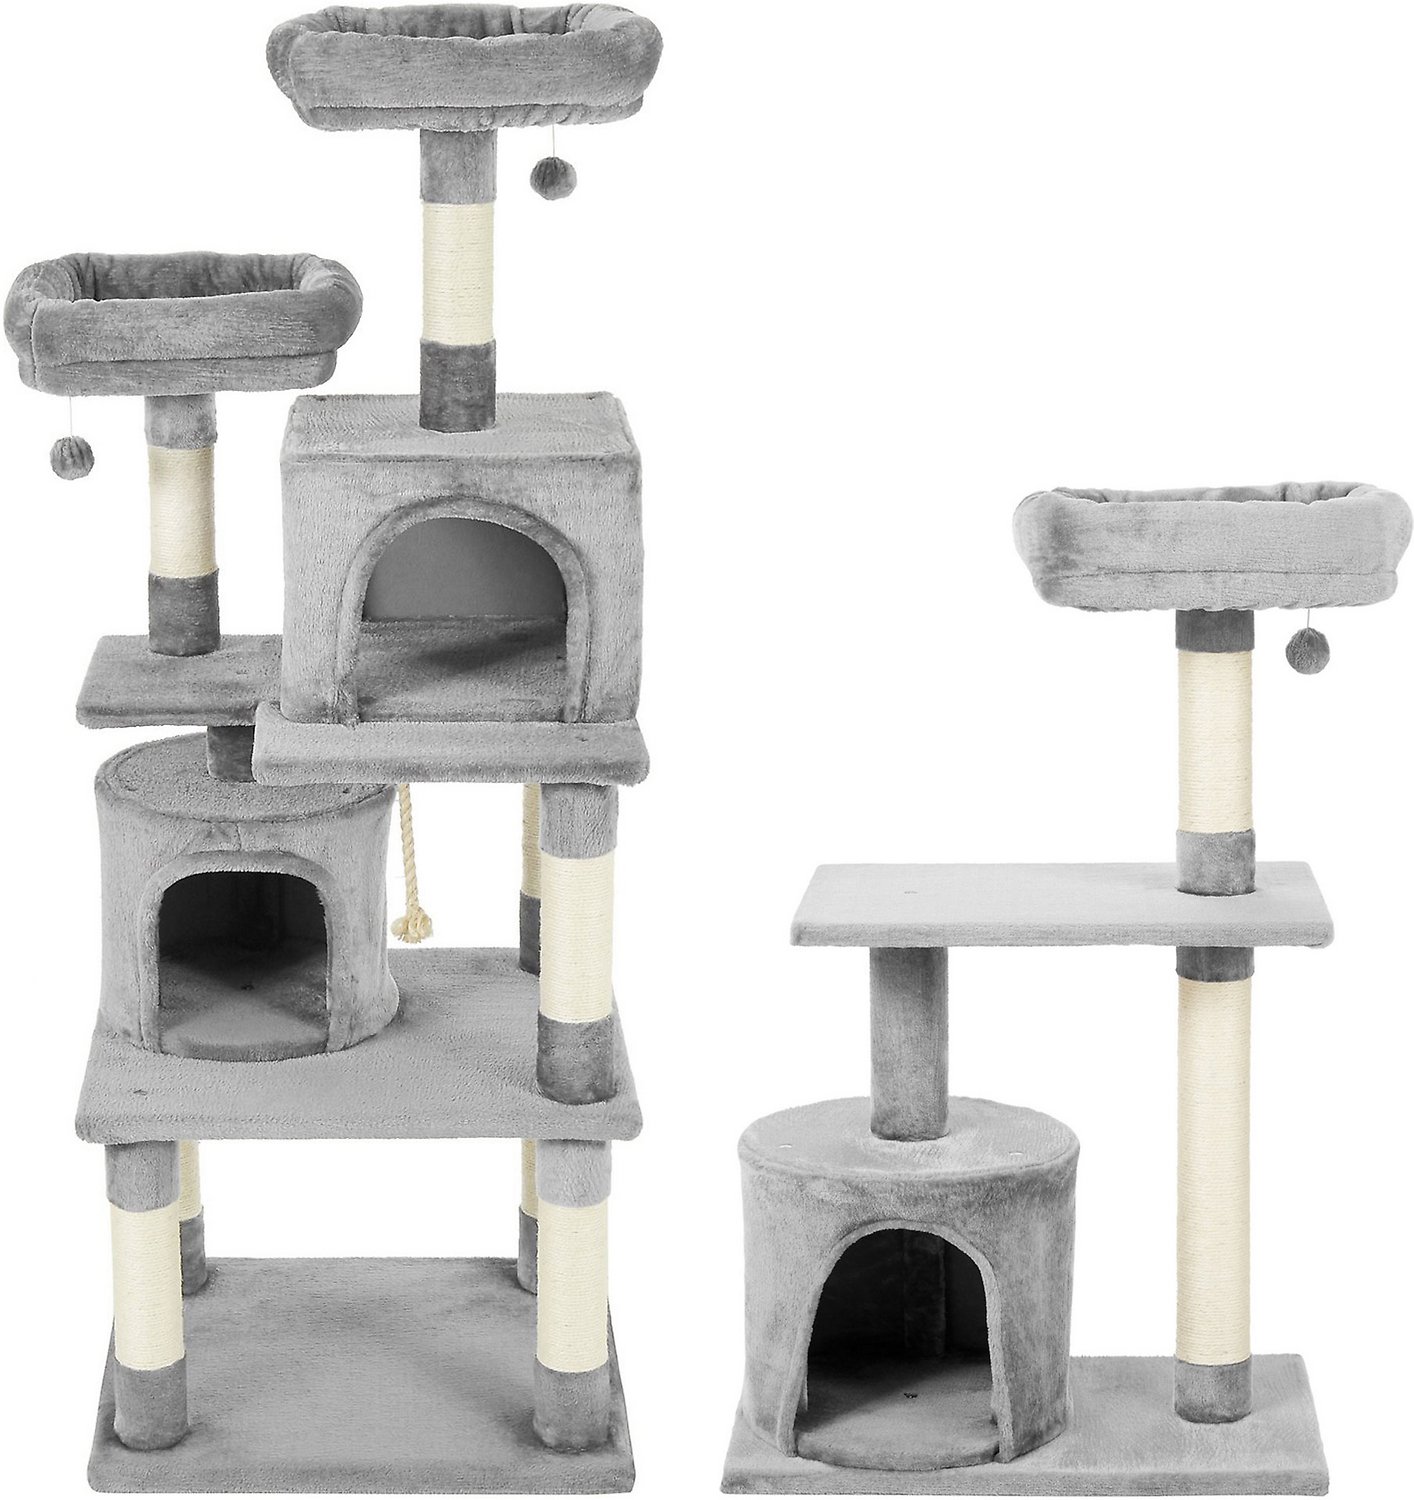 Cat tree and condo combo $74.98 for 61 inch + $39.23 for 38 inch -$22.62 discount = $90.81